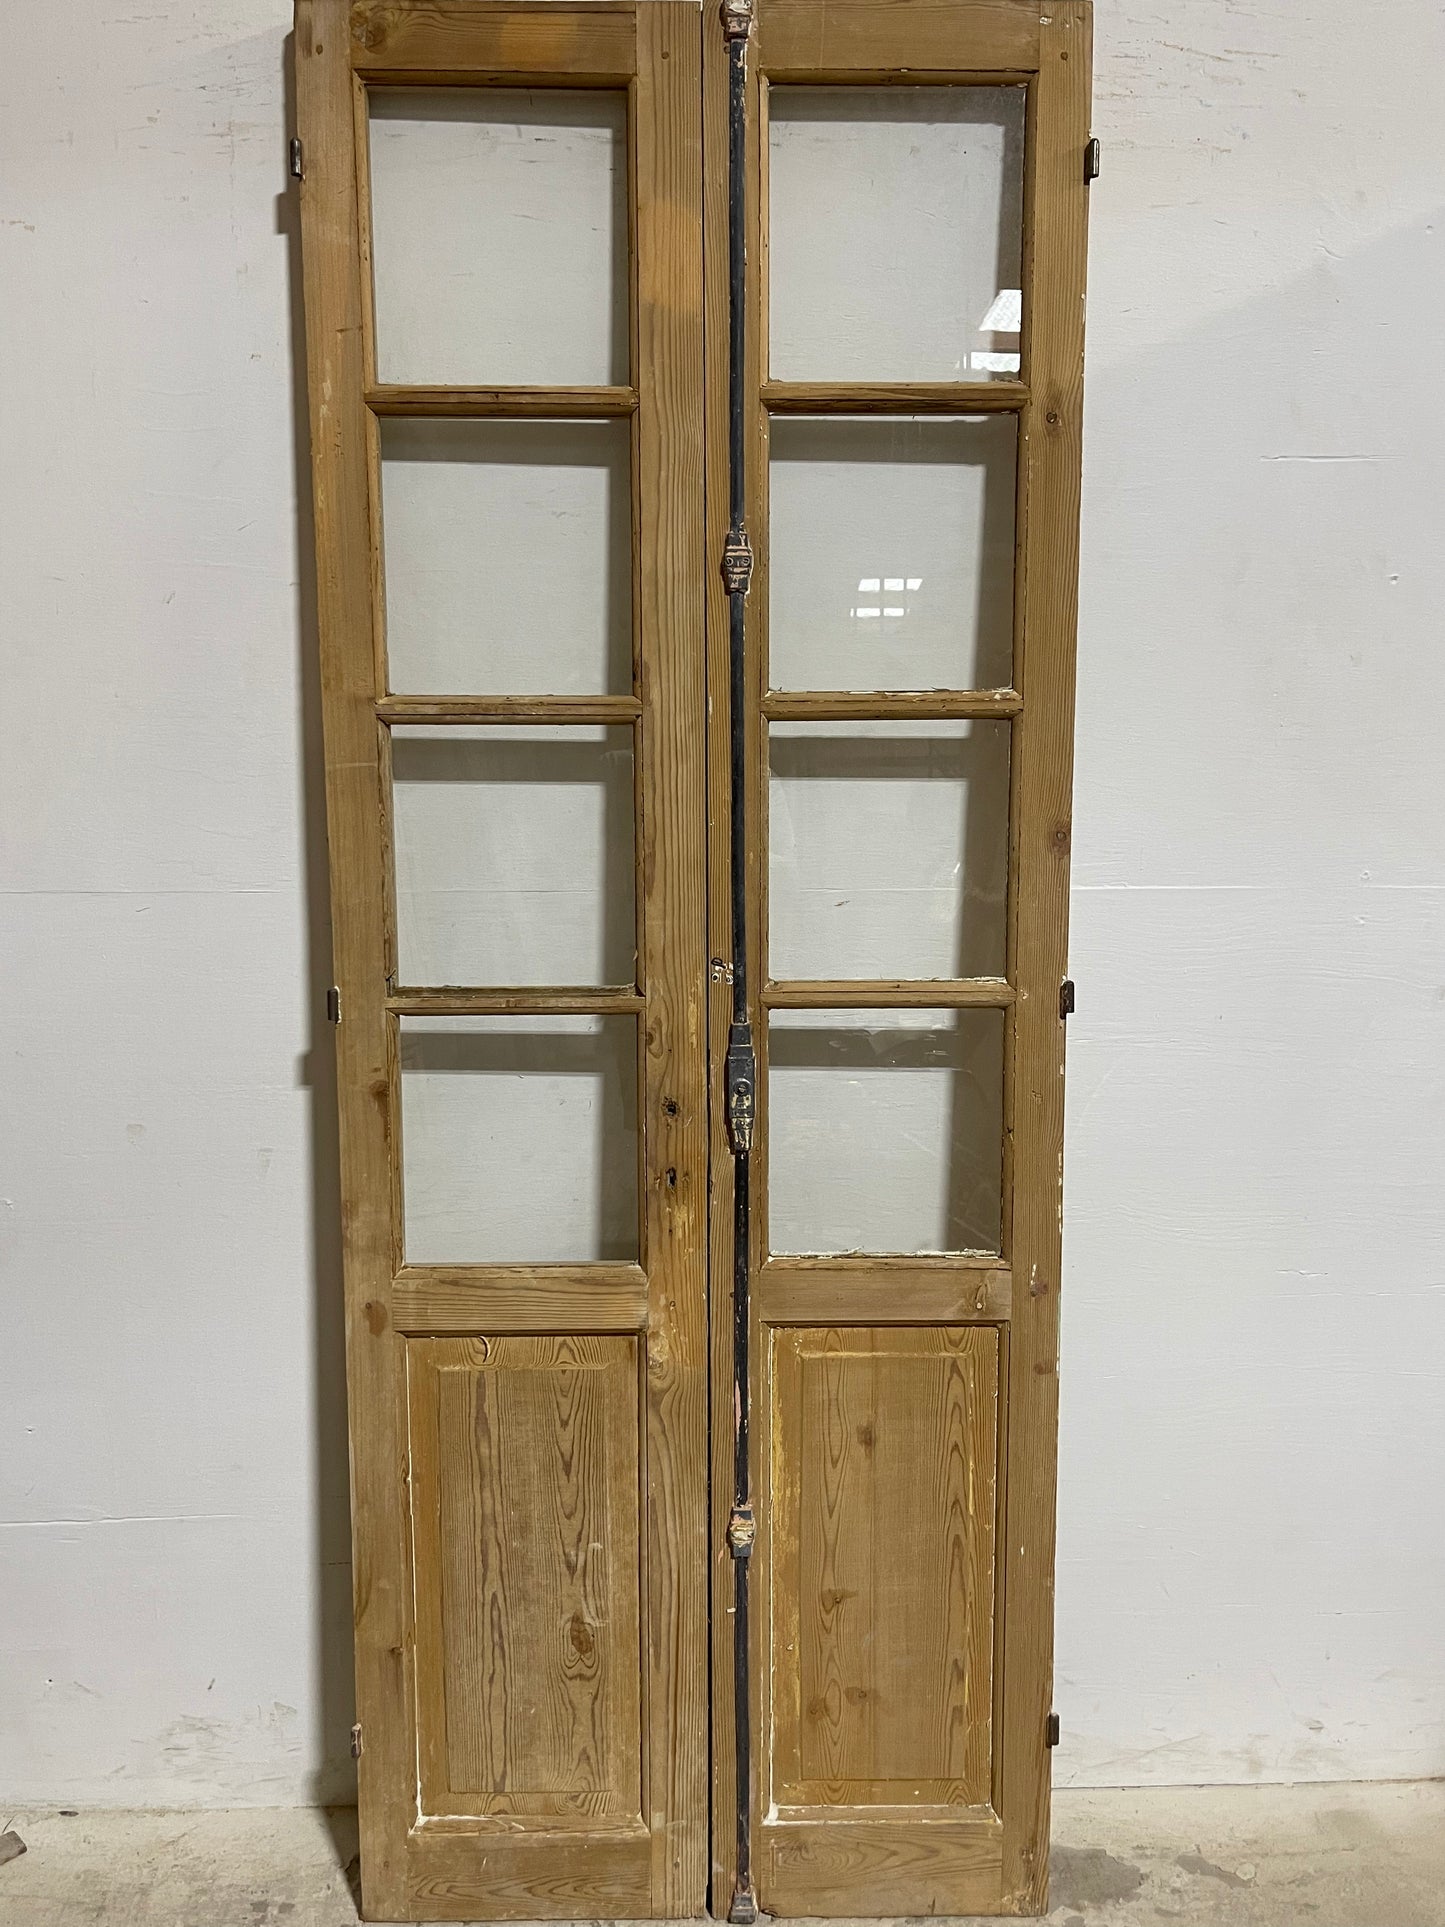 Antique French Panel Doors withg Glass (96x29.75) J326